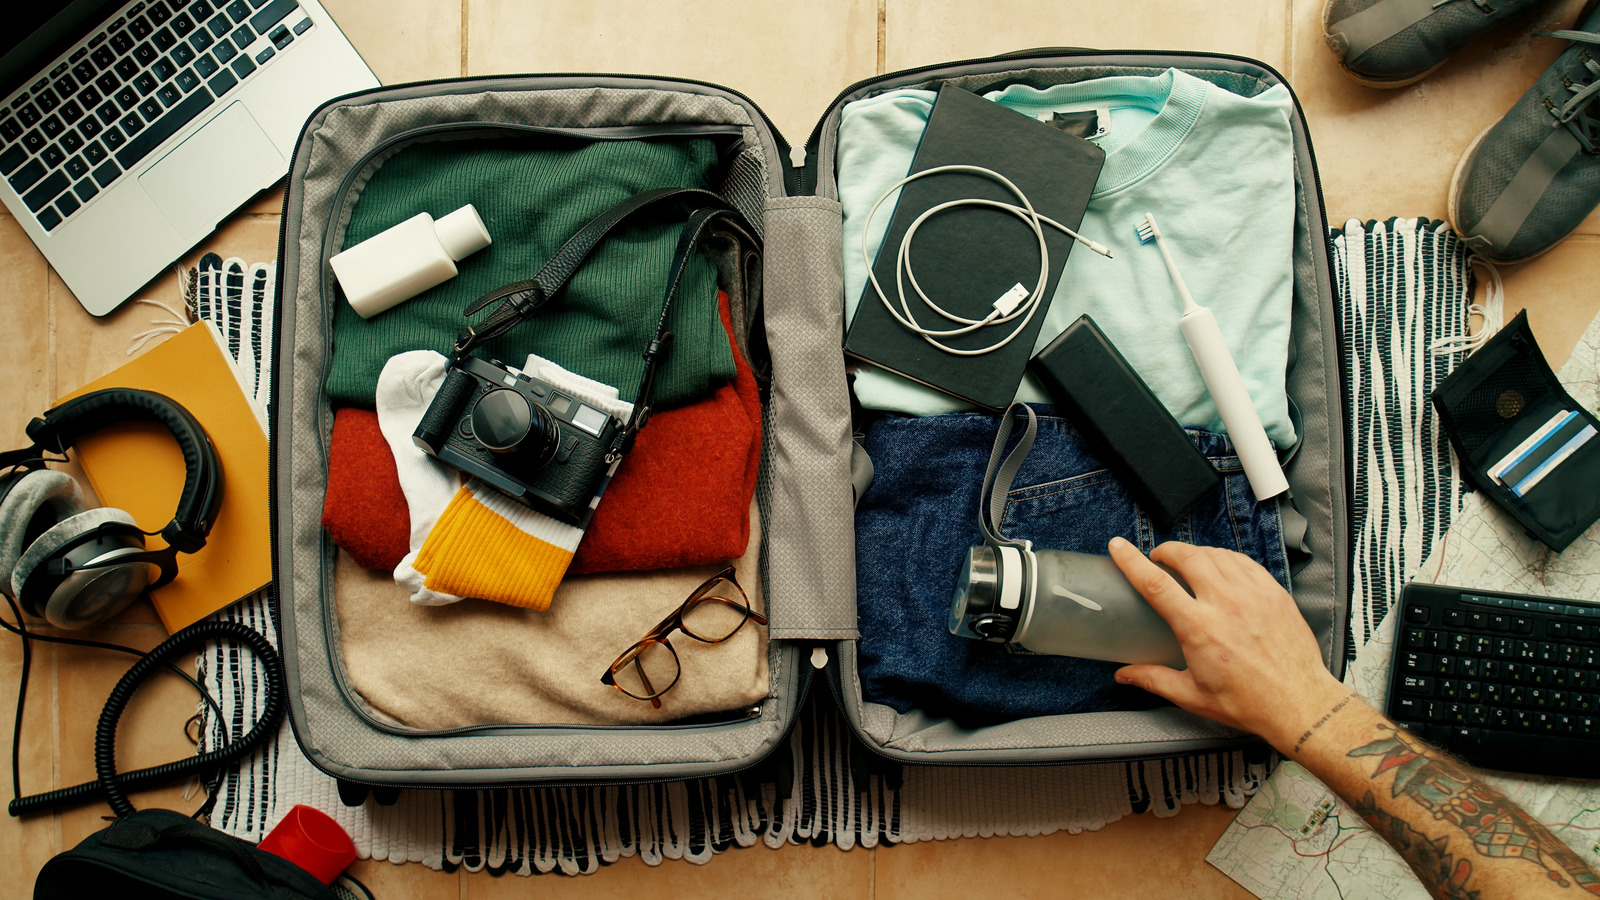 https://www.explore.com/img/gallery/keep-your-luggage-smelling-fresh-with-this-simple-packing-hack/l-intro-1692385136.jpg